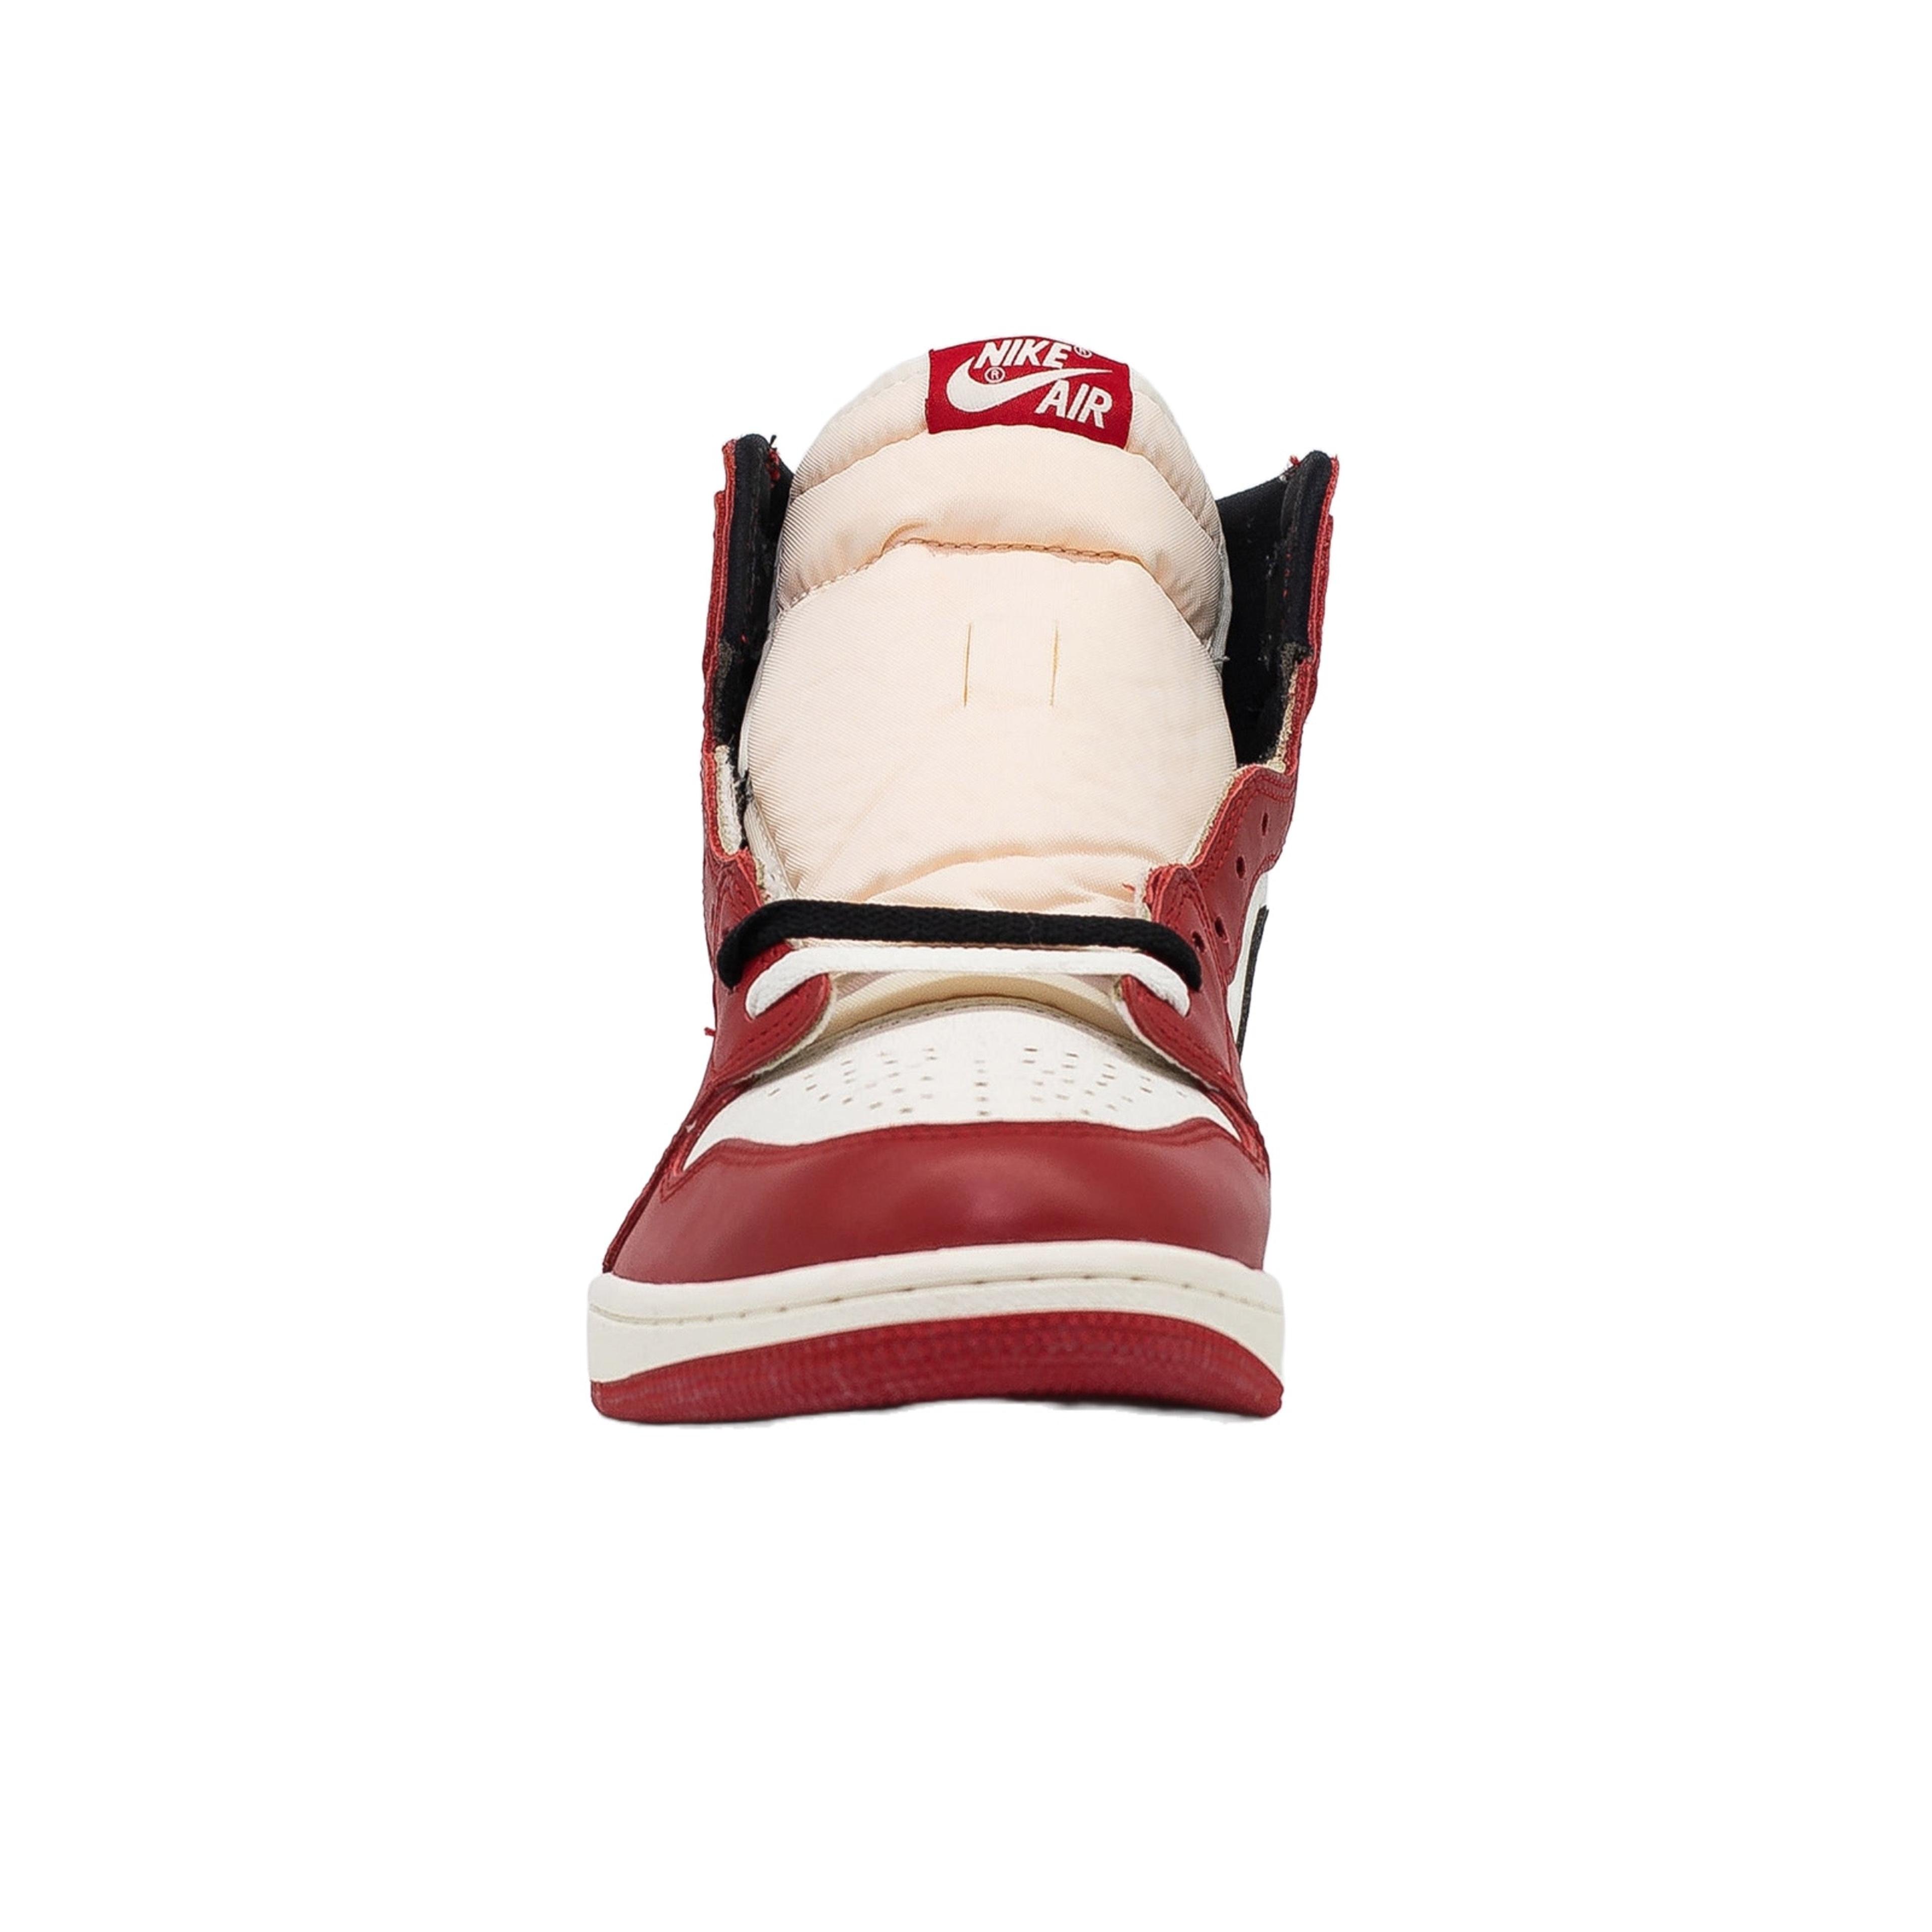 Alternate View 2 of Air Jordan 1 High (GS), Chicago Lost And Found